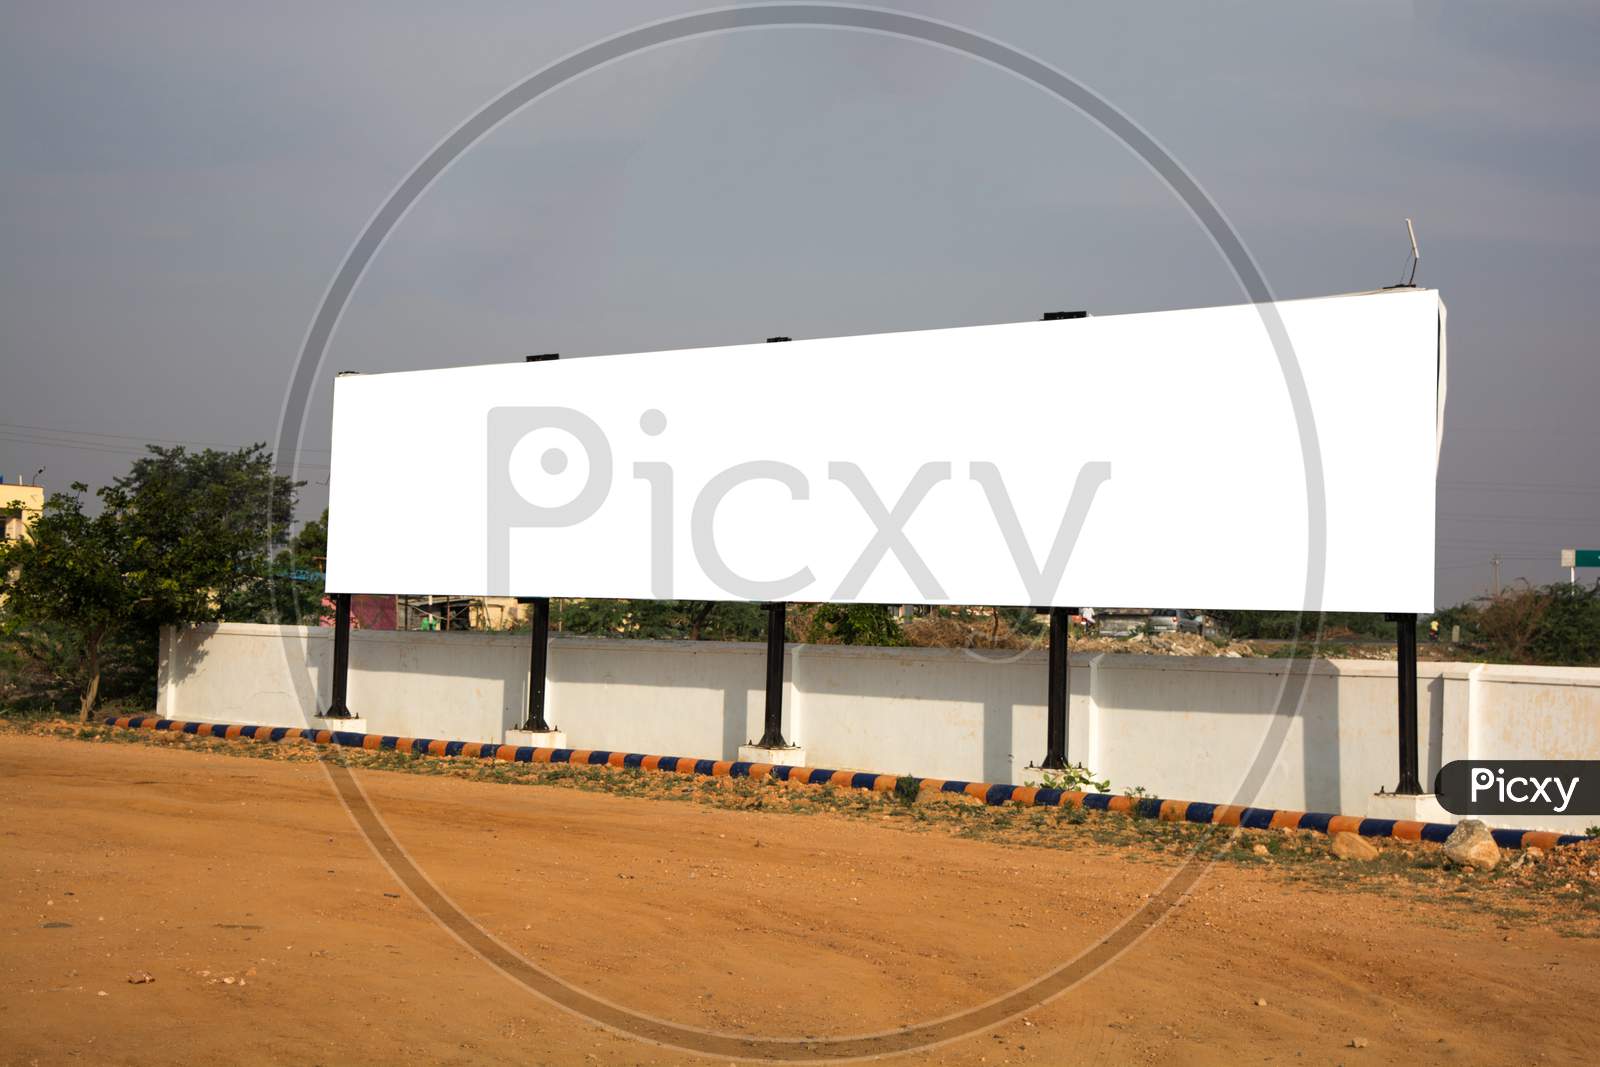 Big Blank Billboard With White Background Space For Advertisement In Urban India.